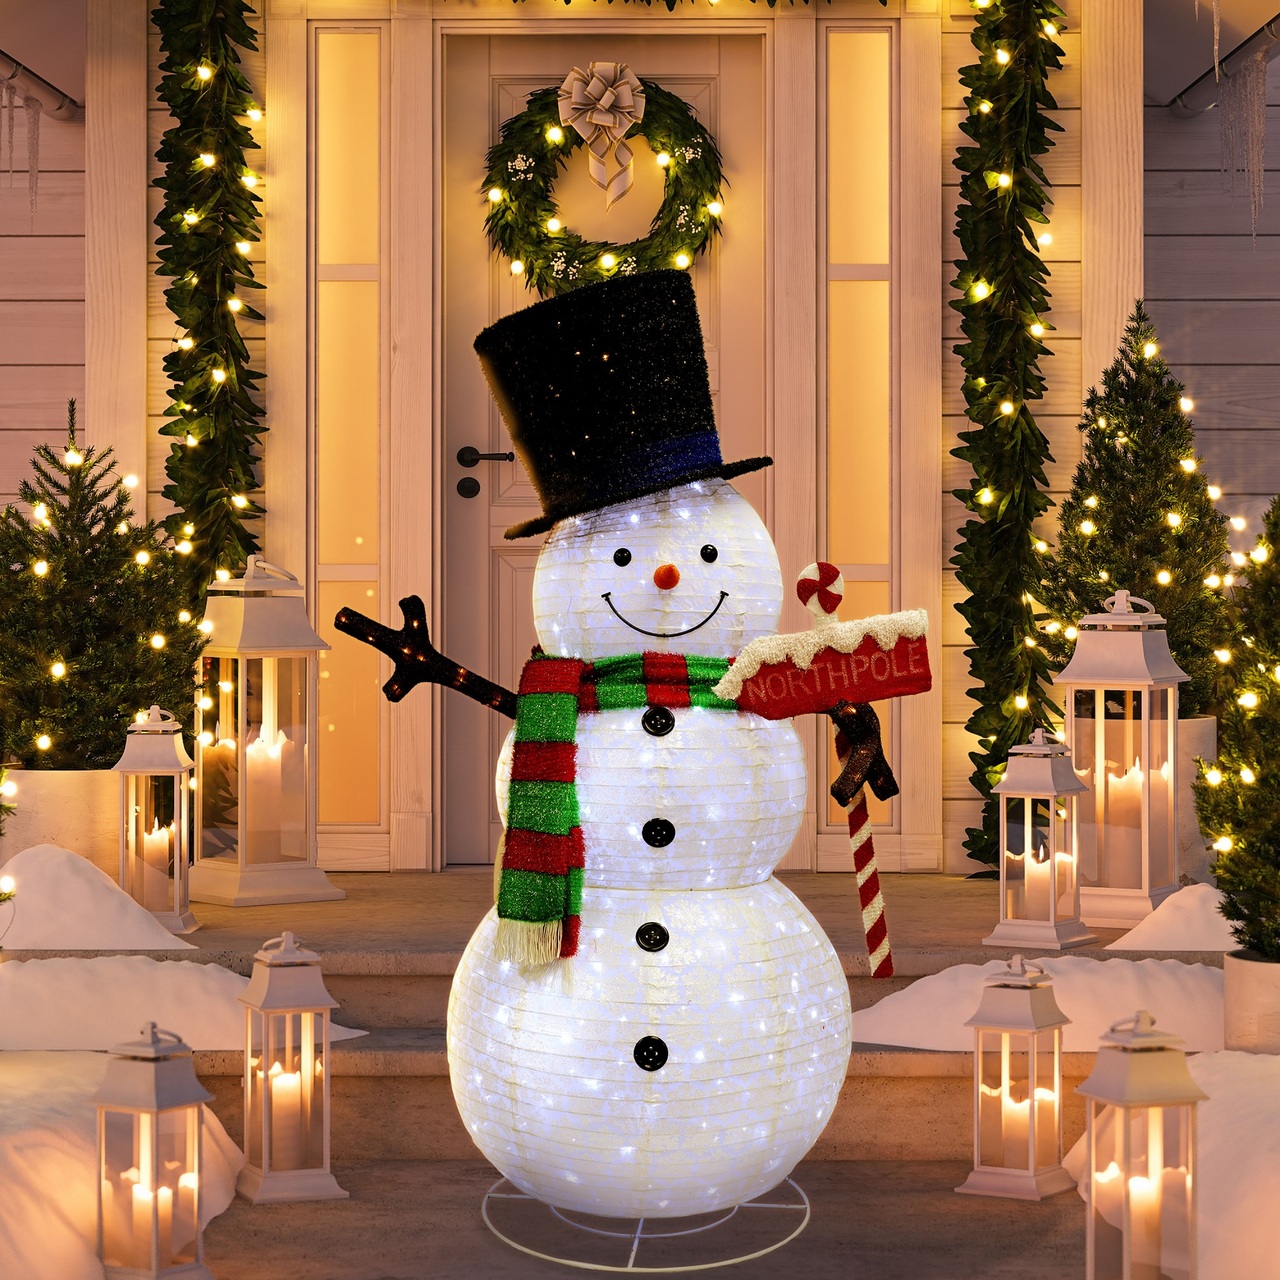 Outdoor Christmas Decorations. 2 Top 70+ Christmas Decoration Ideas - 18